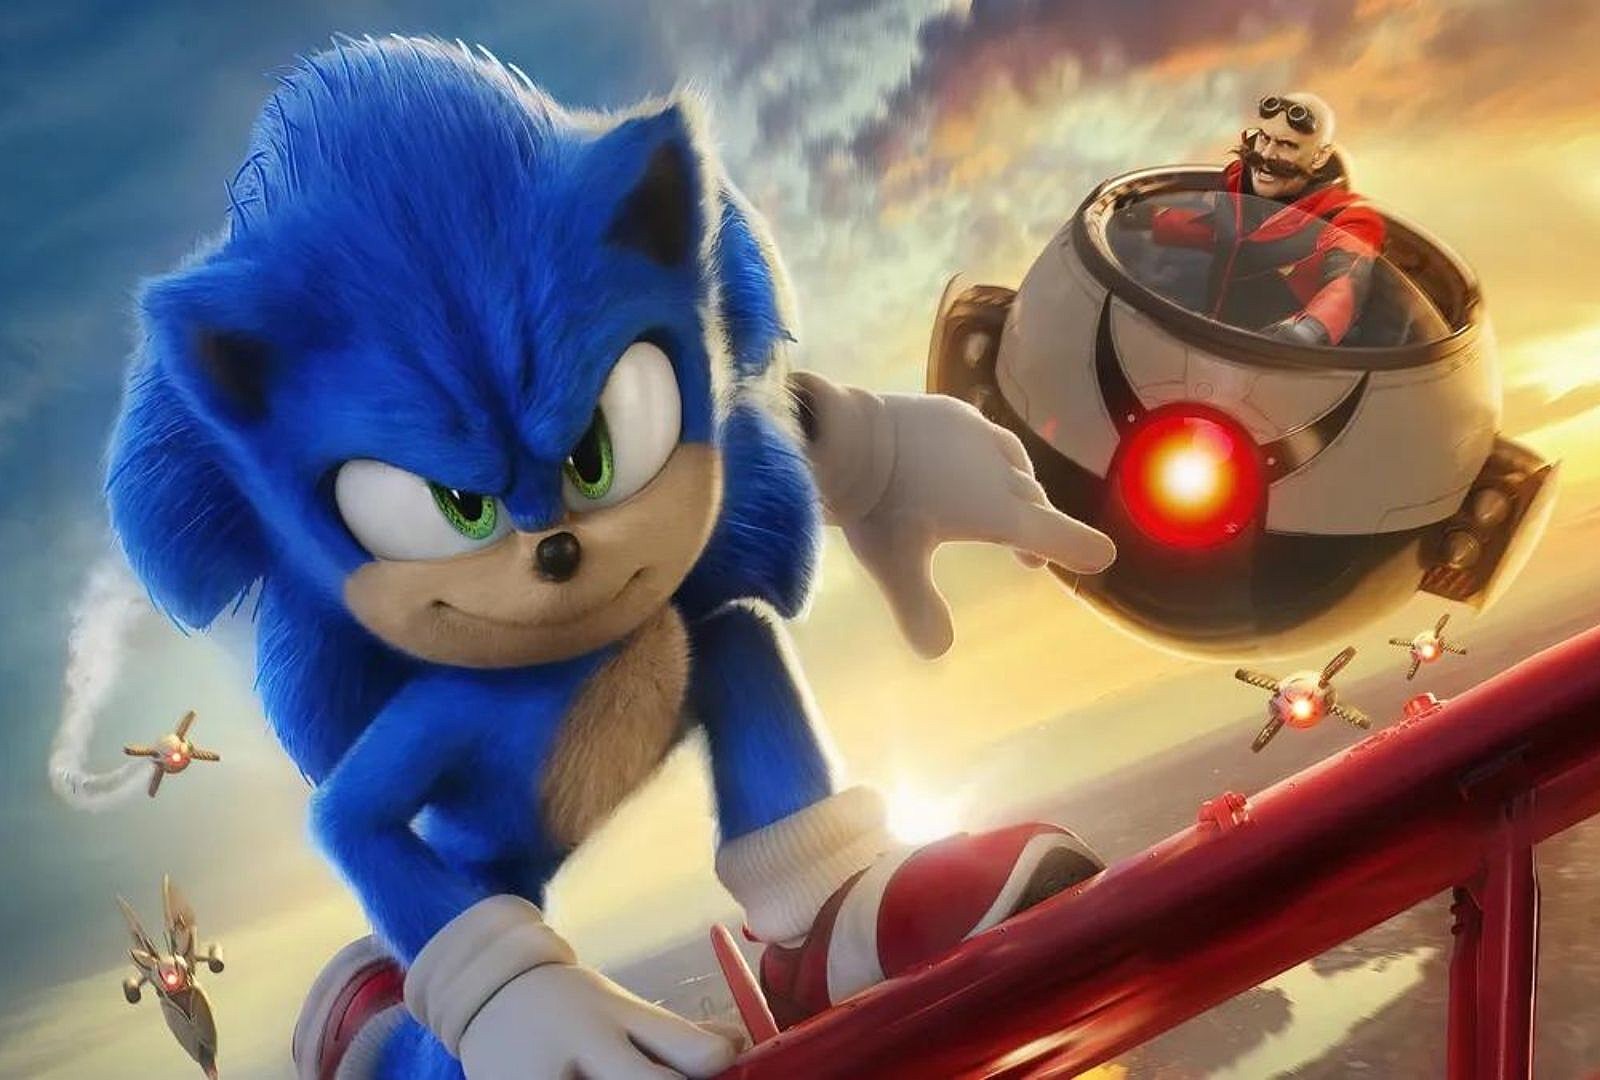 Sonic the Hedgehog on X: We couldn't have done it without all our amazing # Sonic fans! 💙💙💙 Thank you for making us the #1 movie in the world!  #SonicMovie2 is NOW PLAYING 